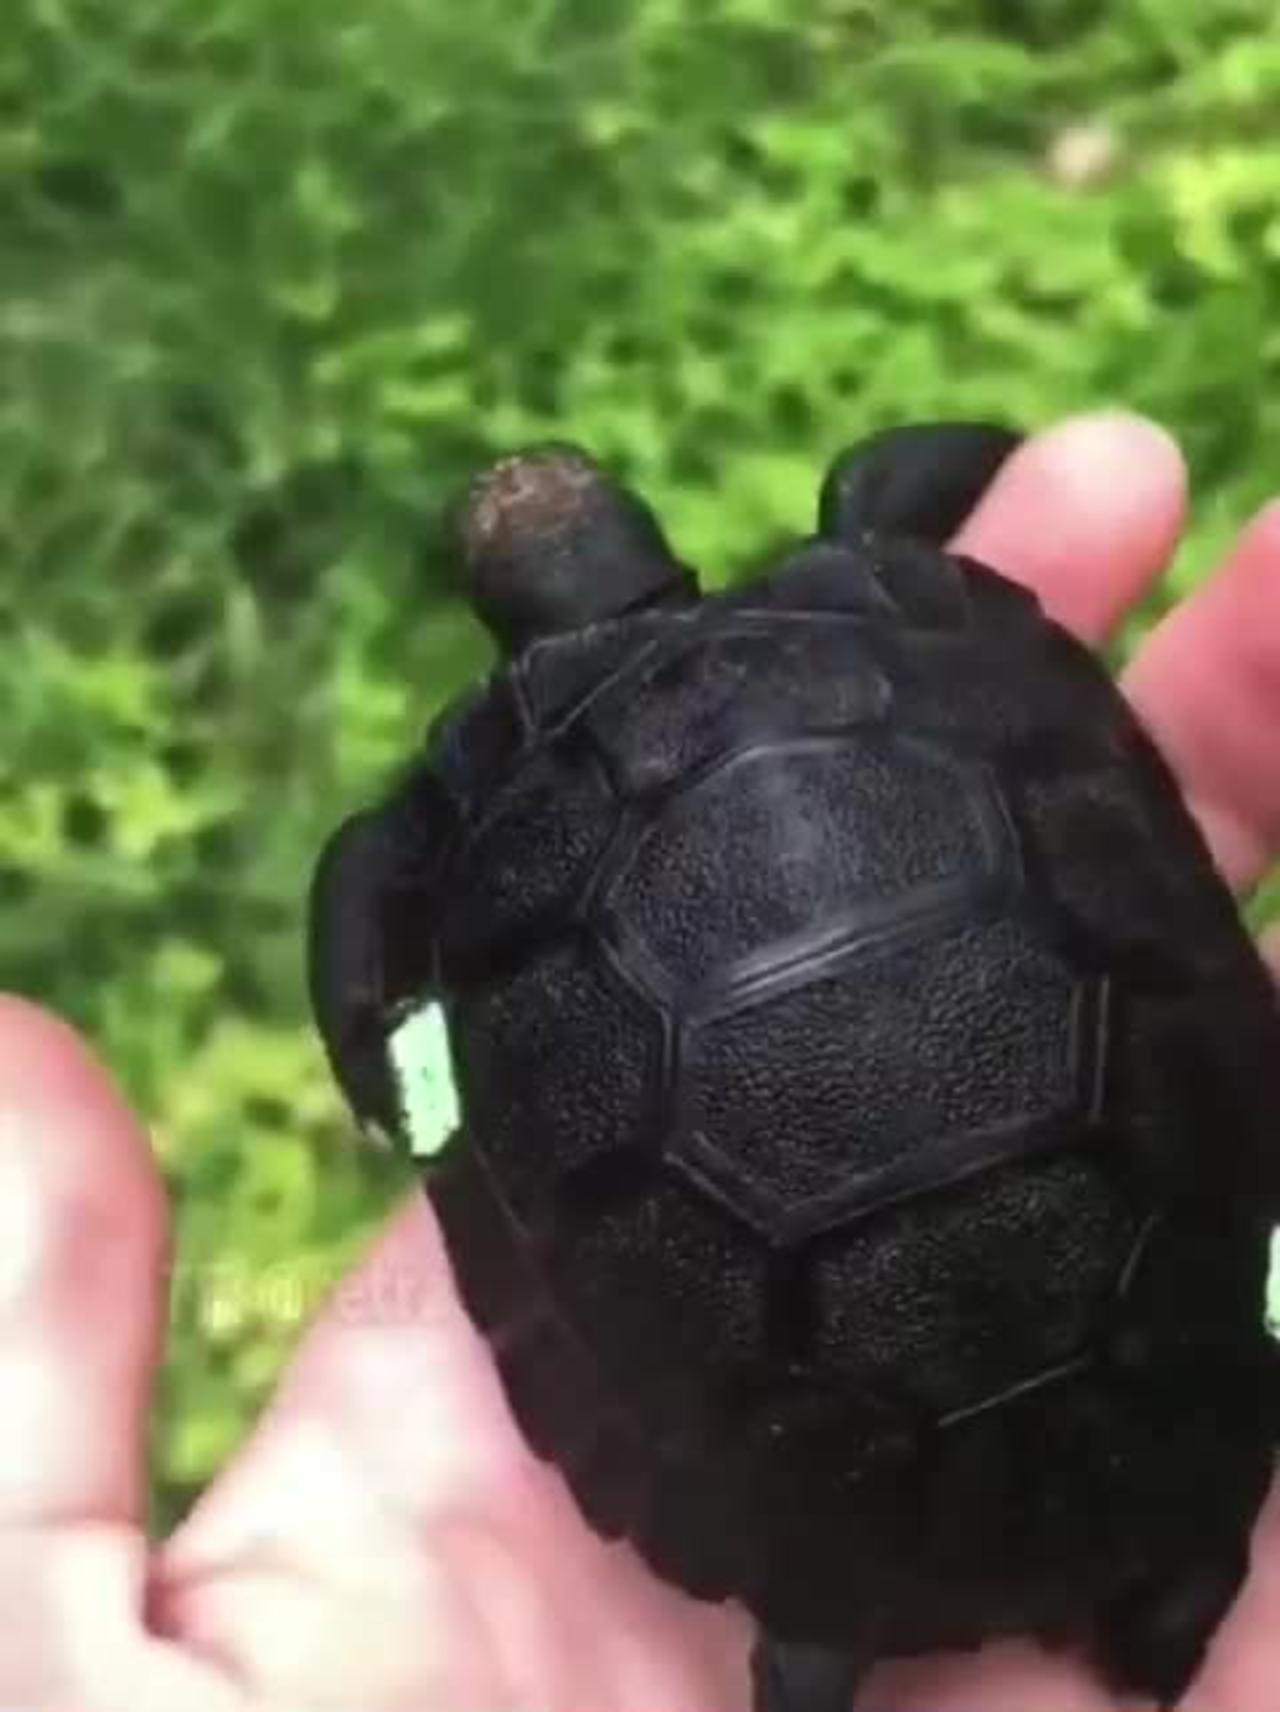 Turtle with melanism.